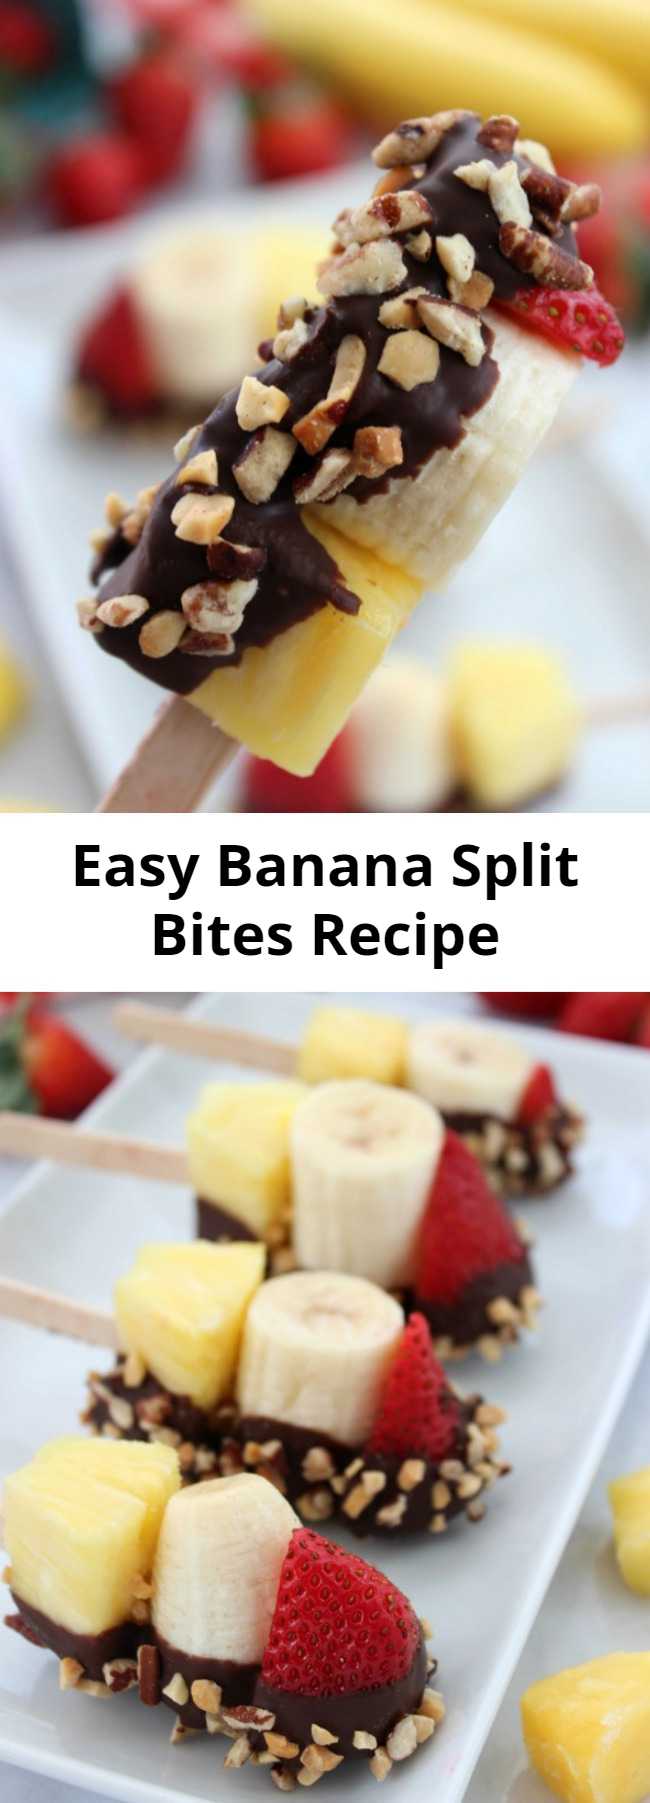 Easy Banana Split Bites Recipe - These Banana Split Bites place a fun and simple twist on your favorite summer treat. Just place Strawberries, Pineapple and Banana on a stick. Then add on some chocolate dipping and nuts! Bam! You have a fun summer time treat.